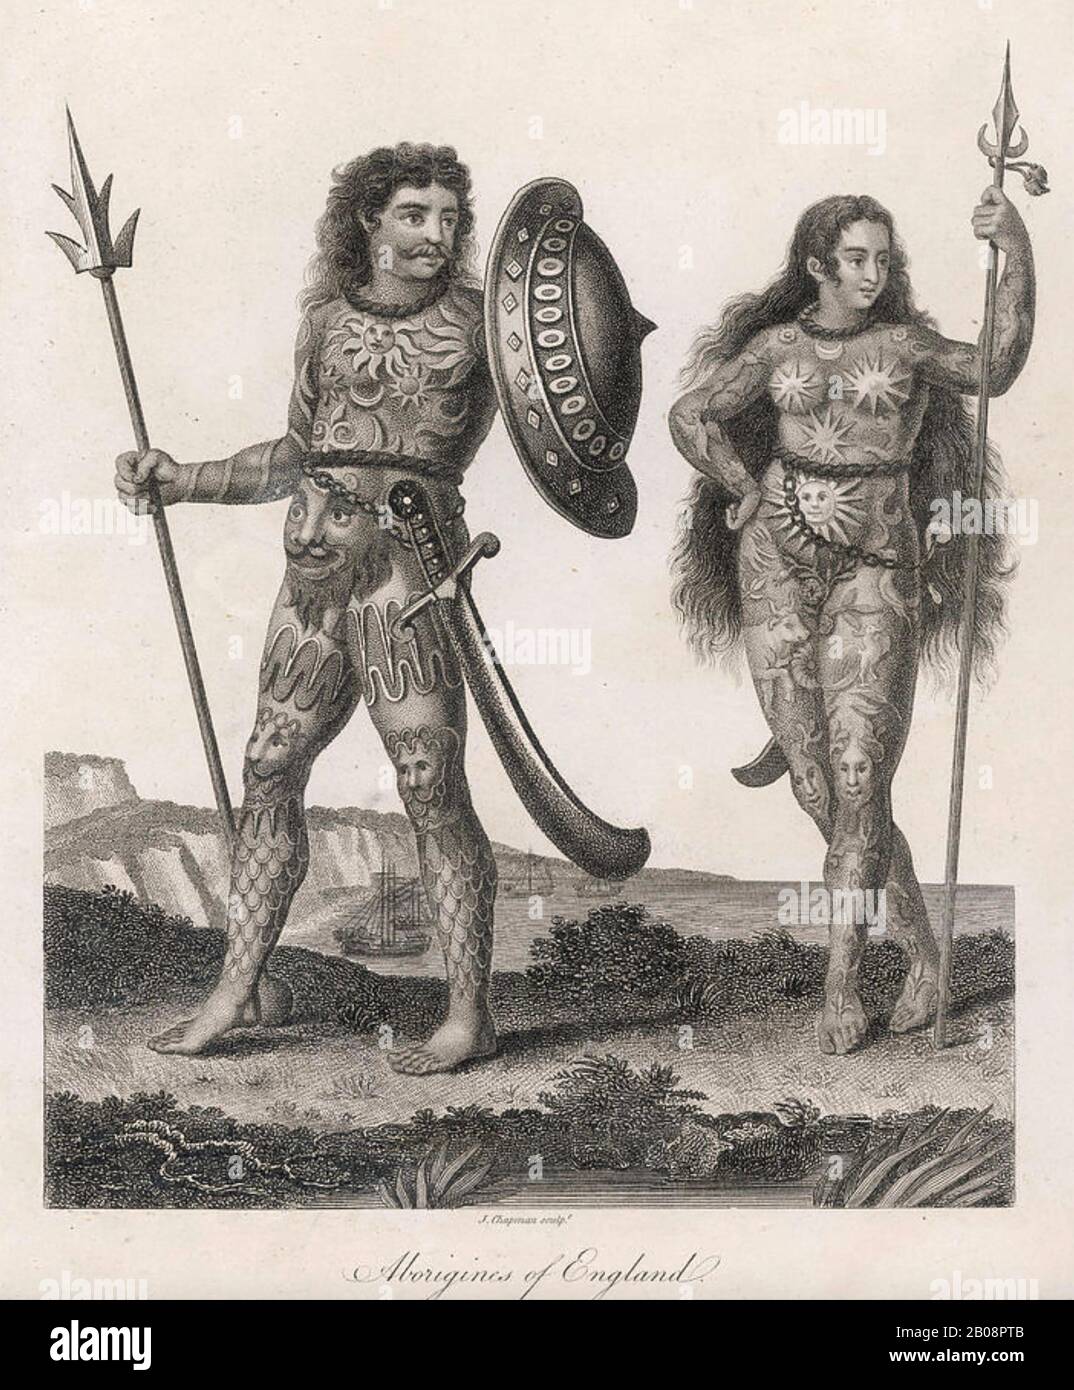 ANCIENT BRITAINS as imagined in an 18th century engraving Stock Photo